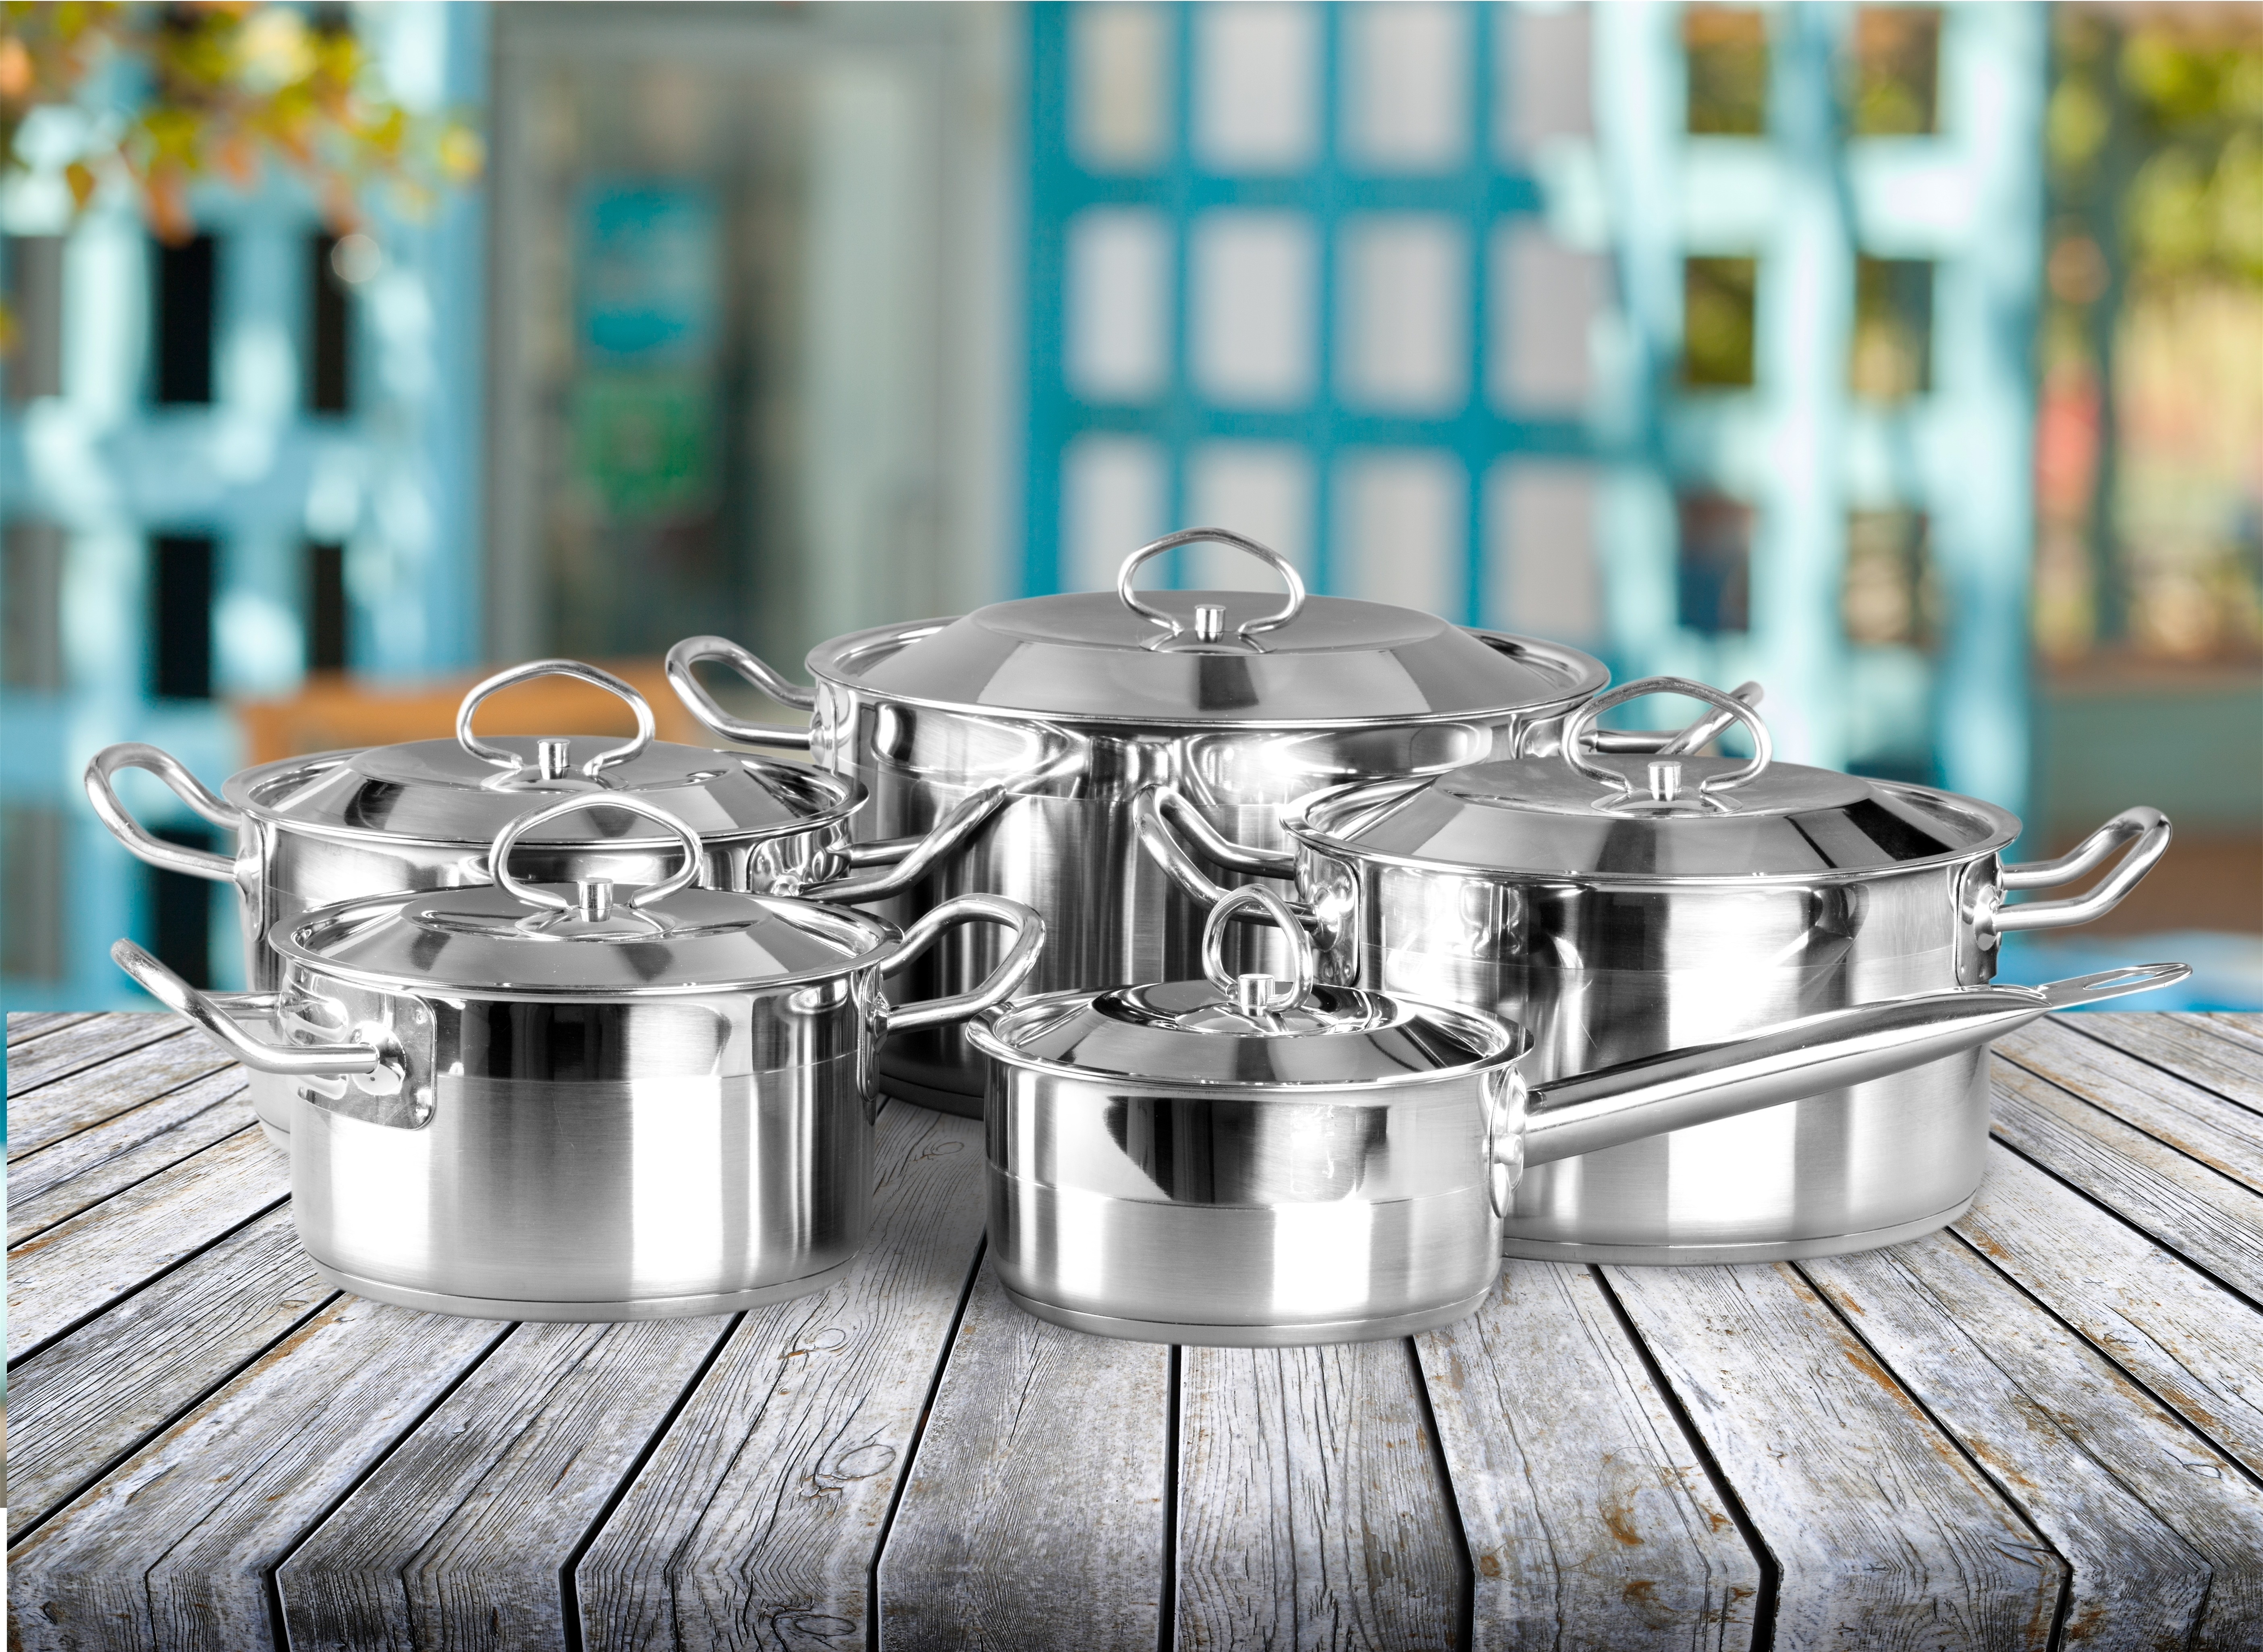 The Best Stainless Steel Pots and Pans